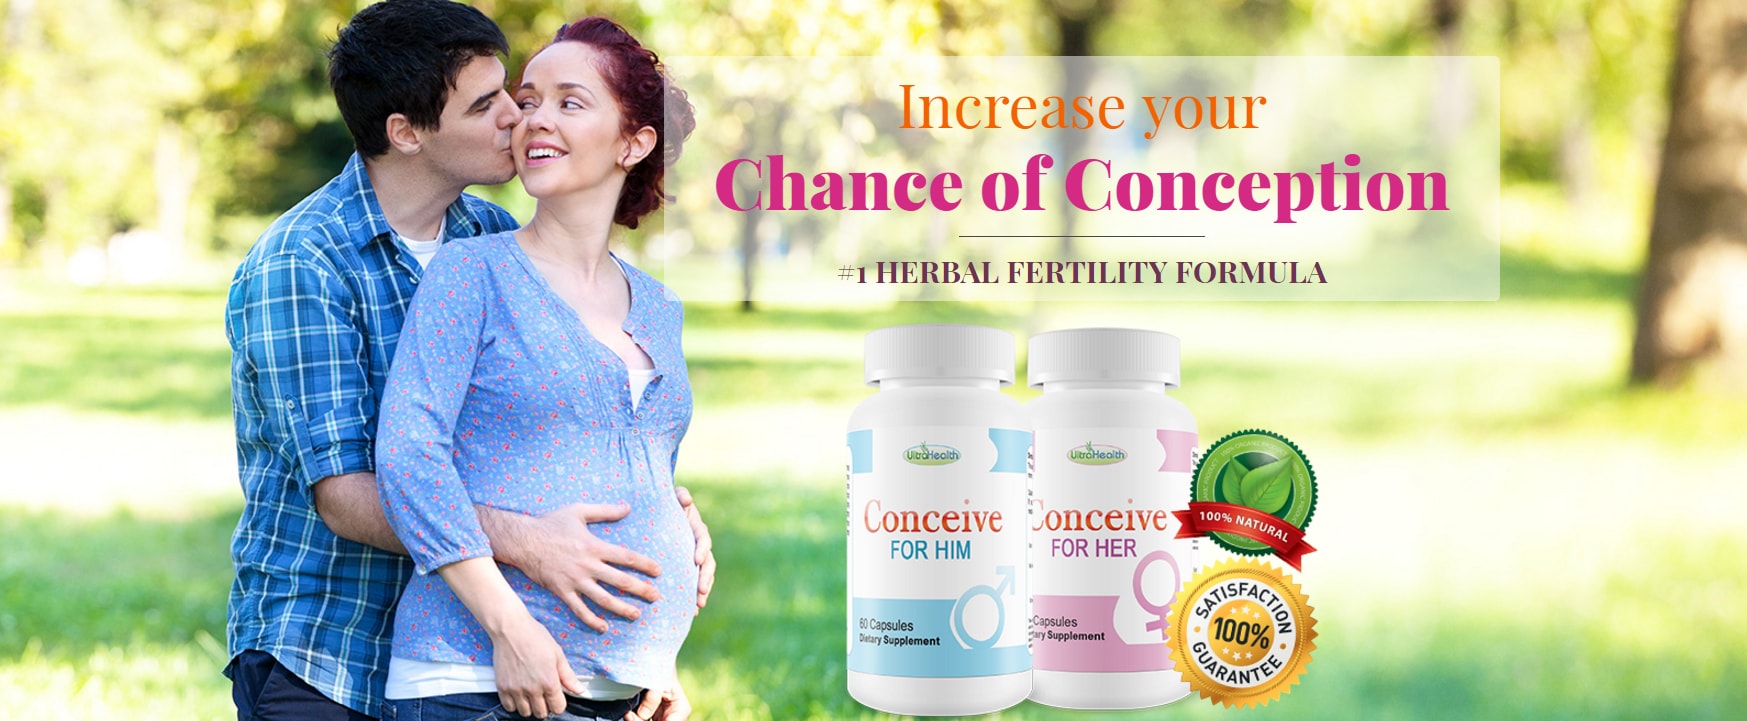 Conceive Easy Fertility Pills In USA